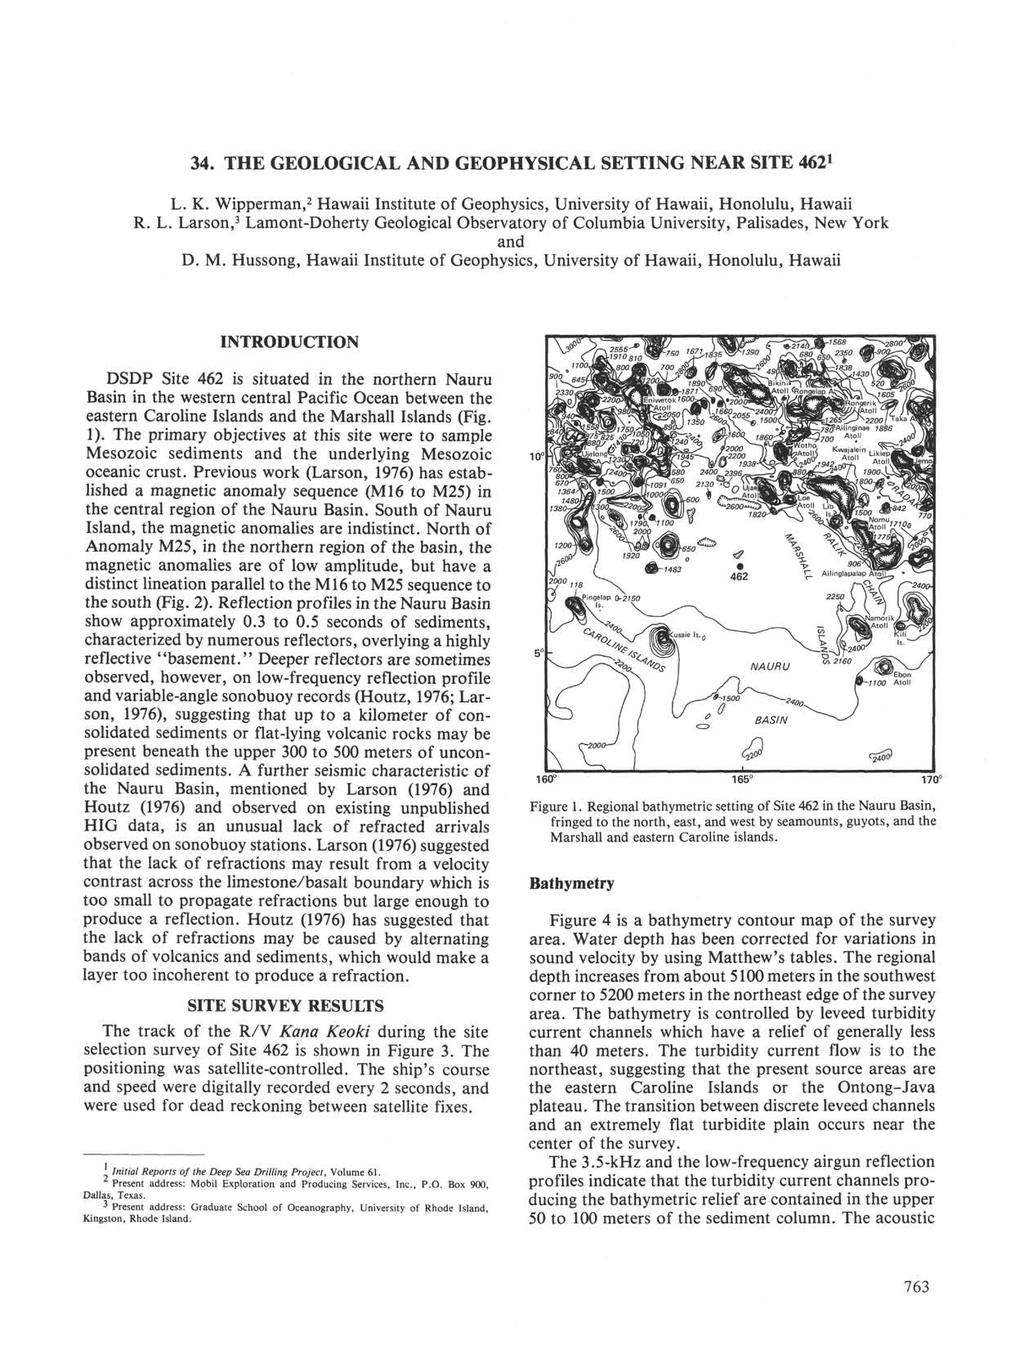 34. THE GEOLOGICAL AND GEOPHYSICAL SETTING NEAR SITE 462 L. K. Wipperman, 2 Hawaii Institute of Geophysics, University of Hawaii, Honolulu, Hawaii R. L. Larson, 3 Lamont-Doherty Geological Observatory of Columbia University, Palisades, New York and D.